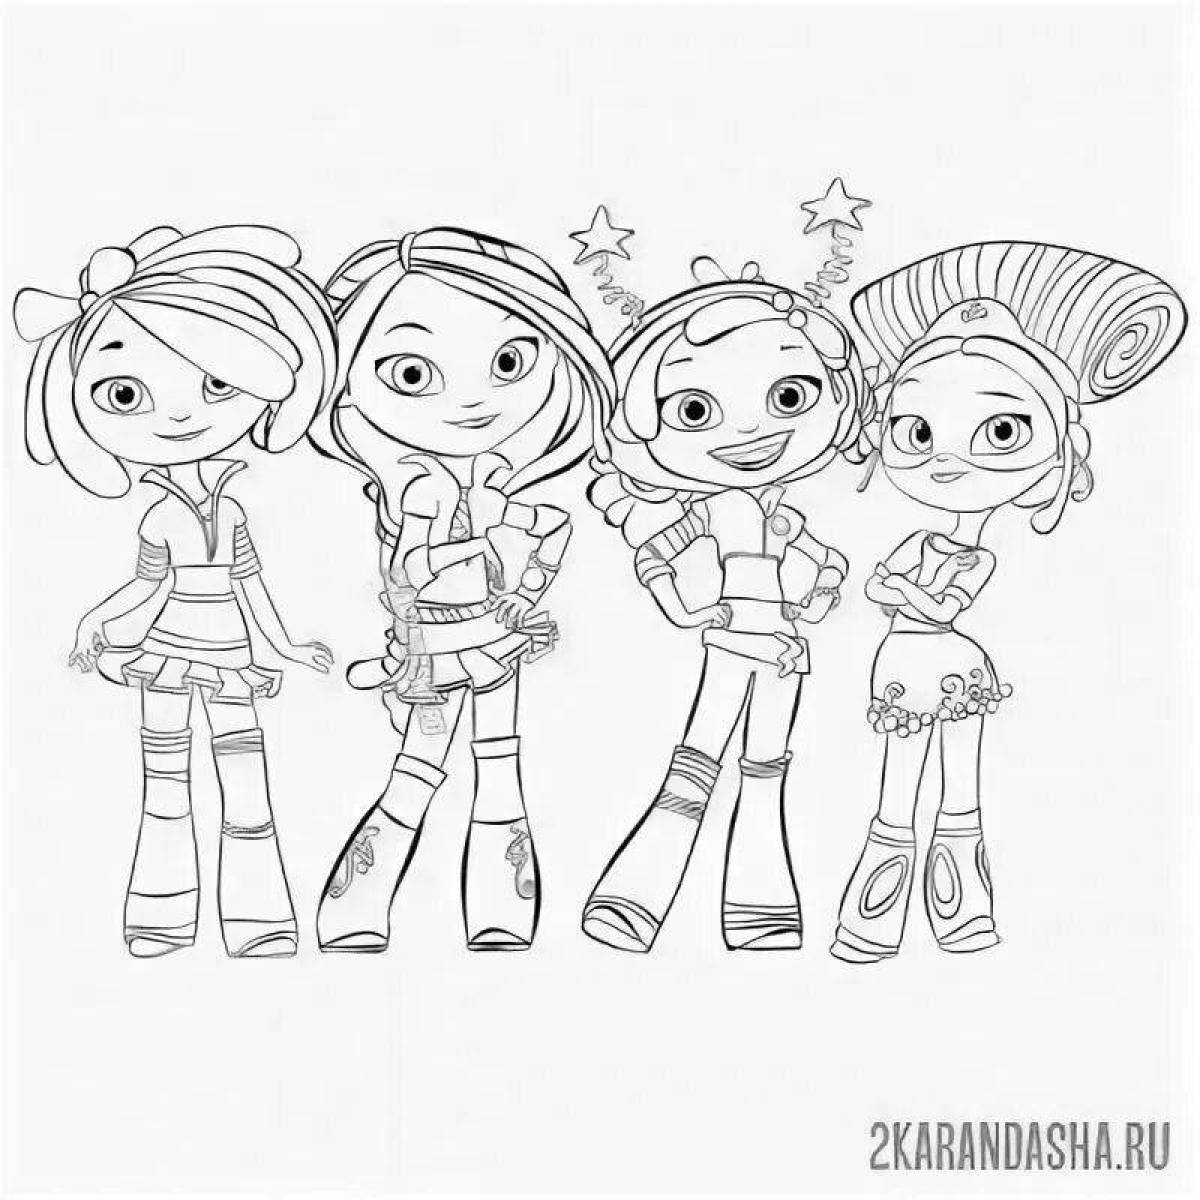 Exciting coloring page turn on the fairy patrol